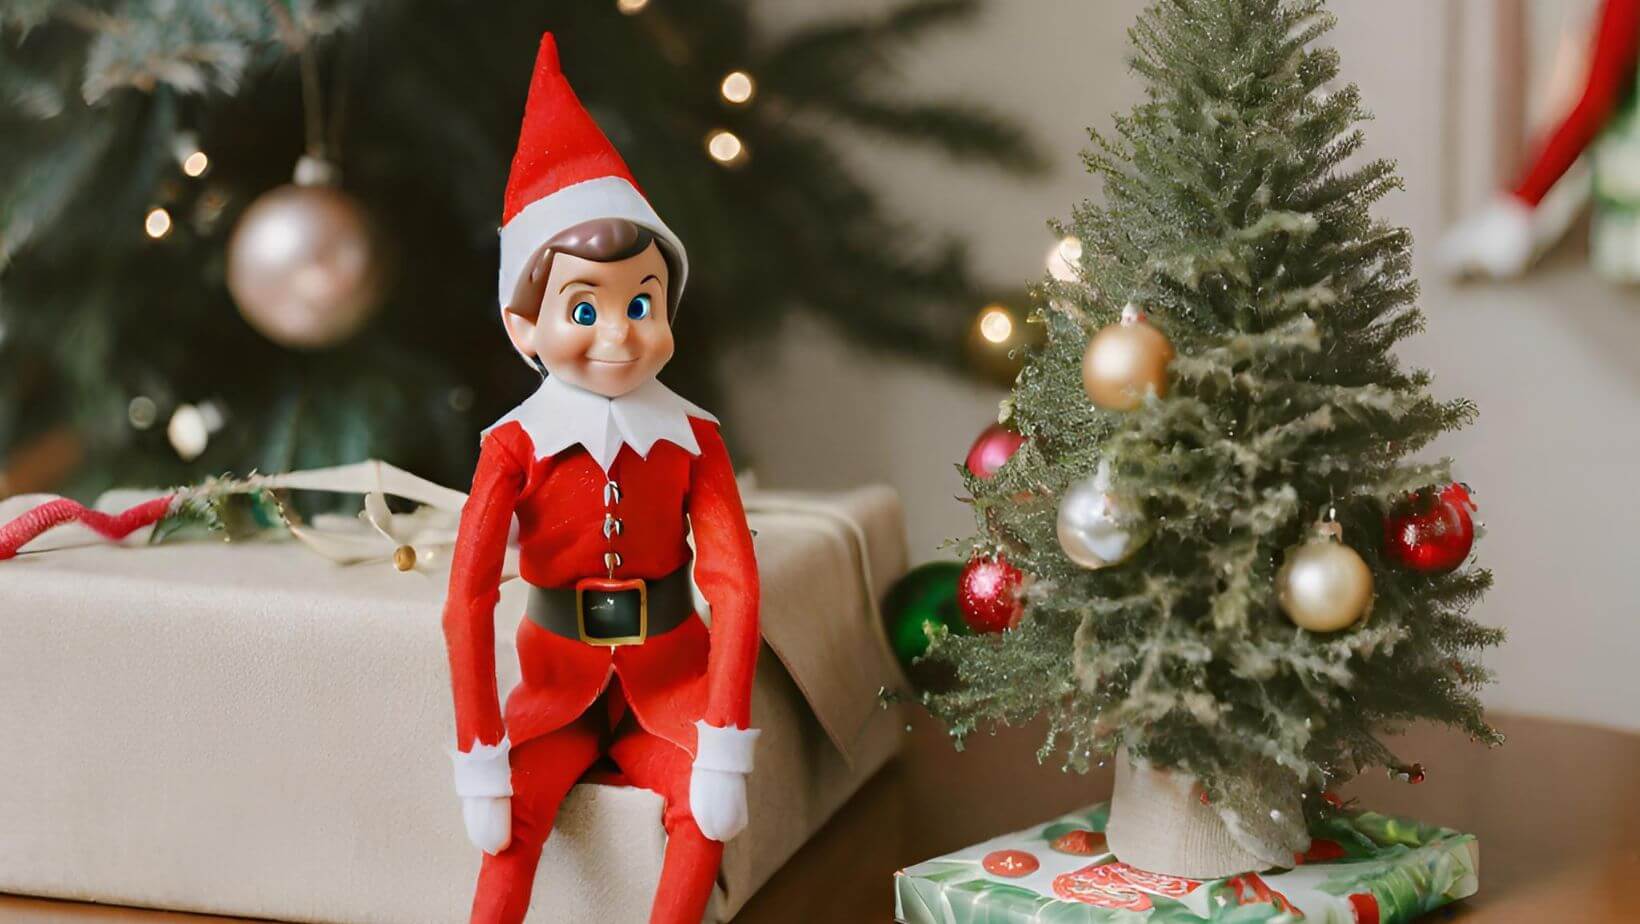 What is Elf on the Shelf?